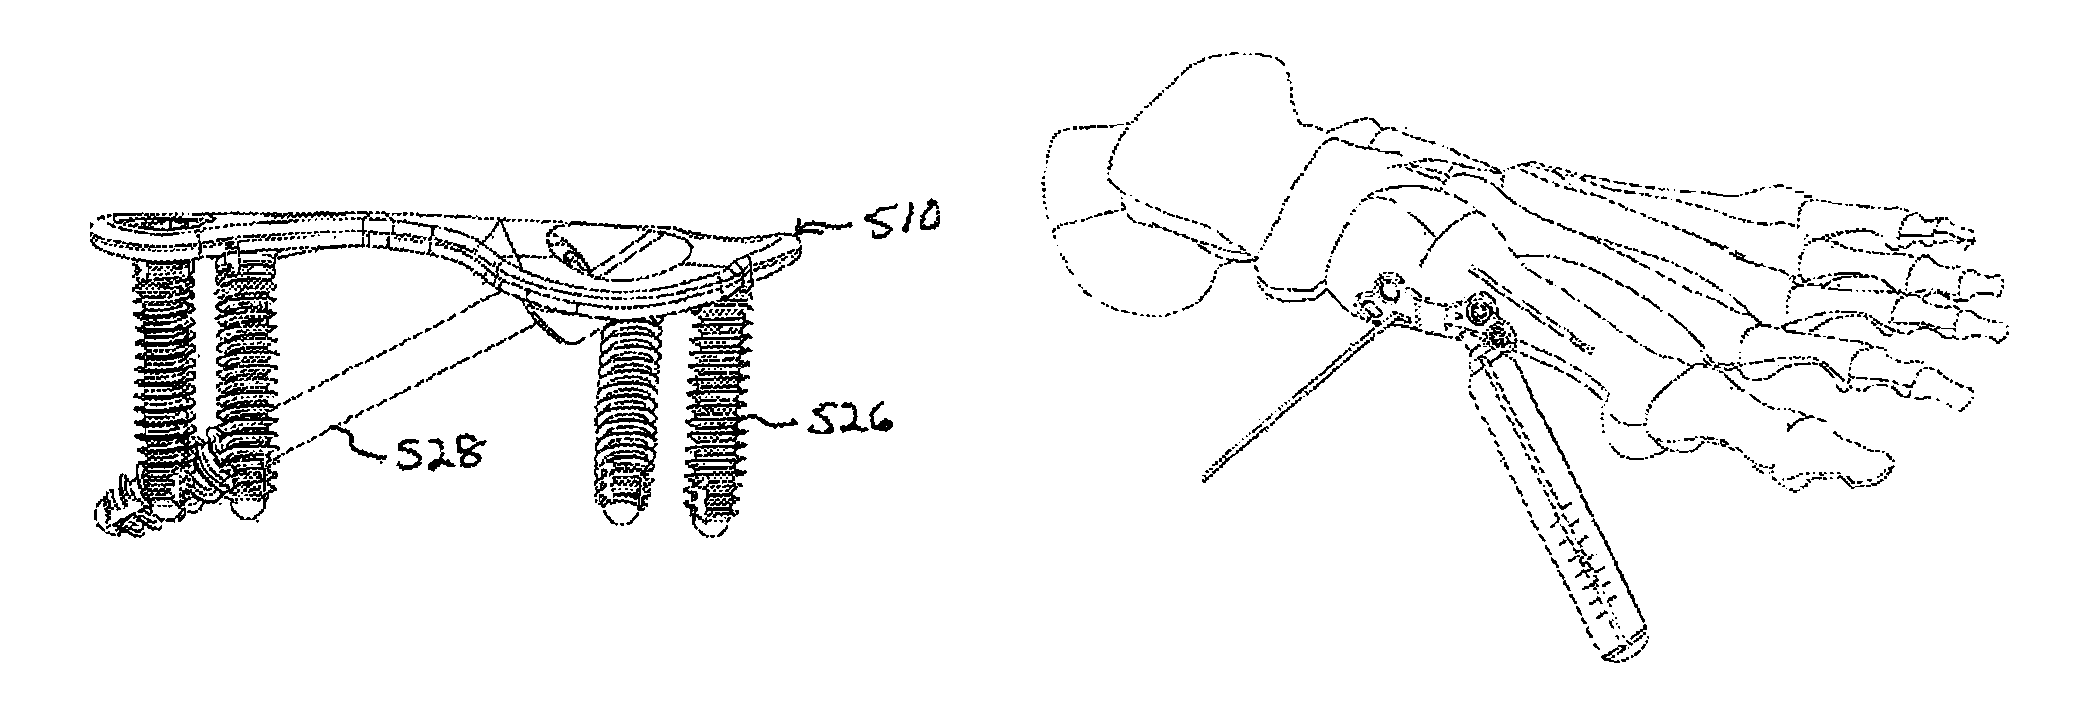 Orthopedic compression plate and method of surgery